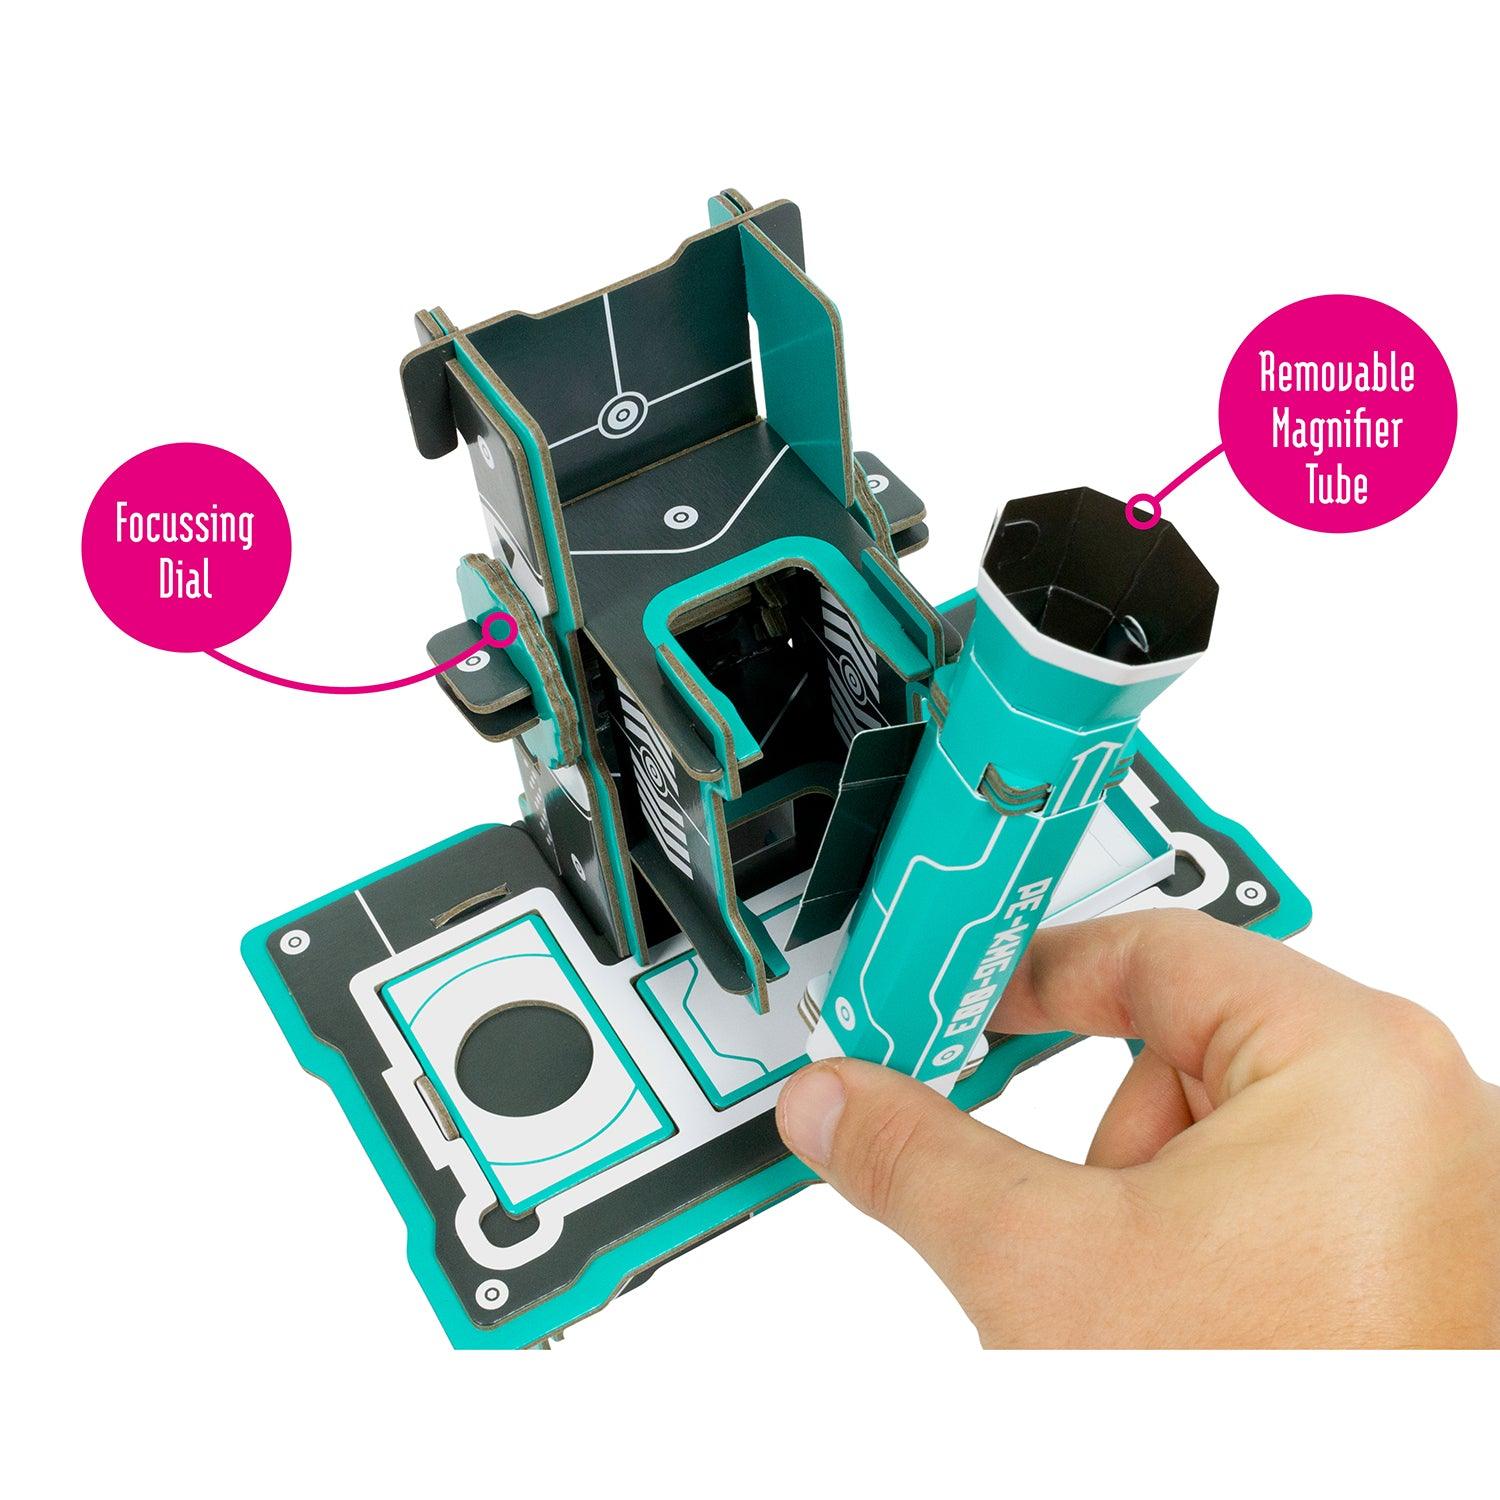 Build Your Own Microscope Kit - Kits - STEM Toy - Science Museum Shop